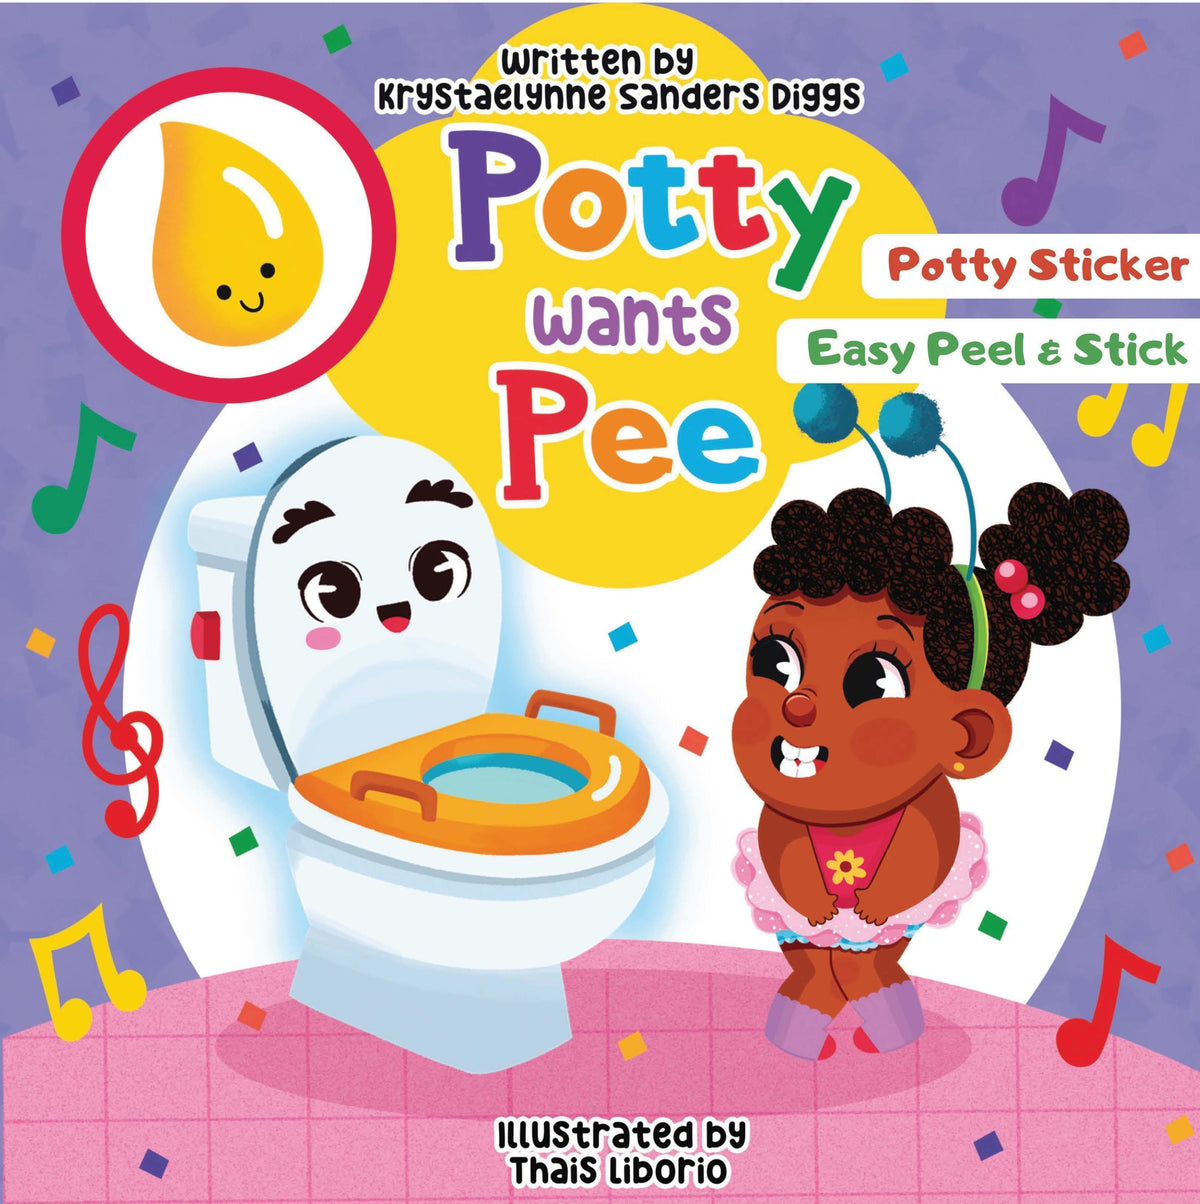 Potty Training Bundle: Two Book Set - Author Krystaelynne Sanders Diggs [Body Safety]